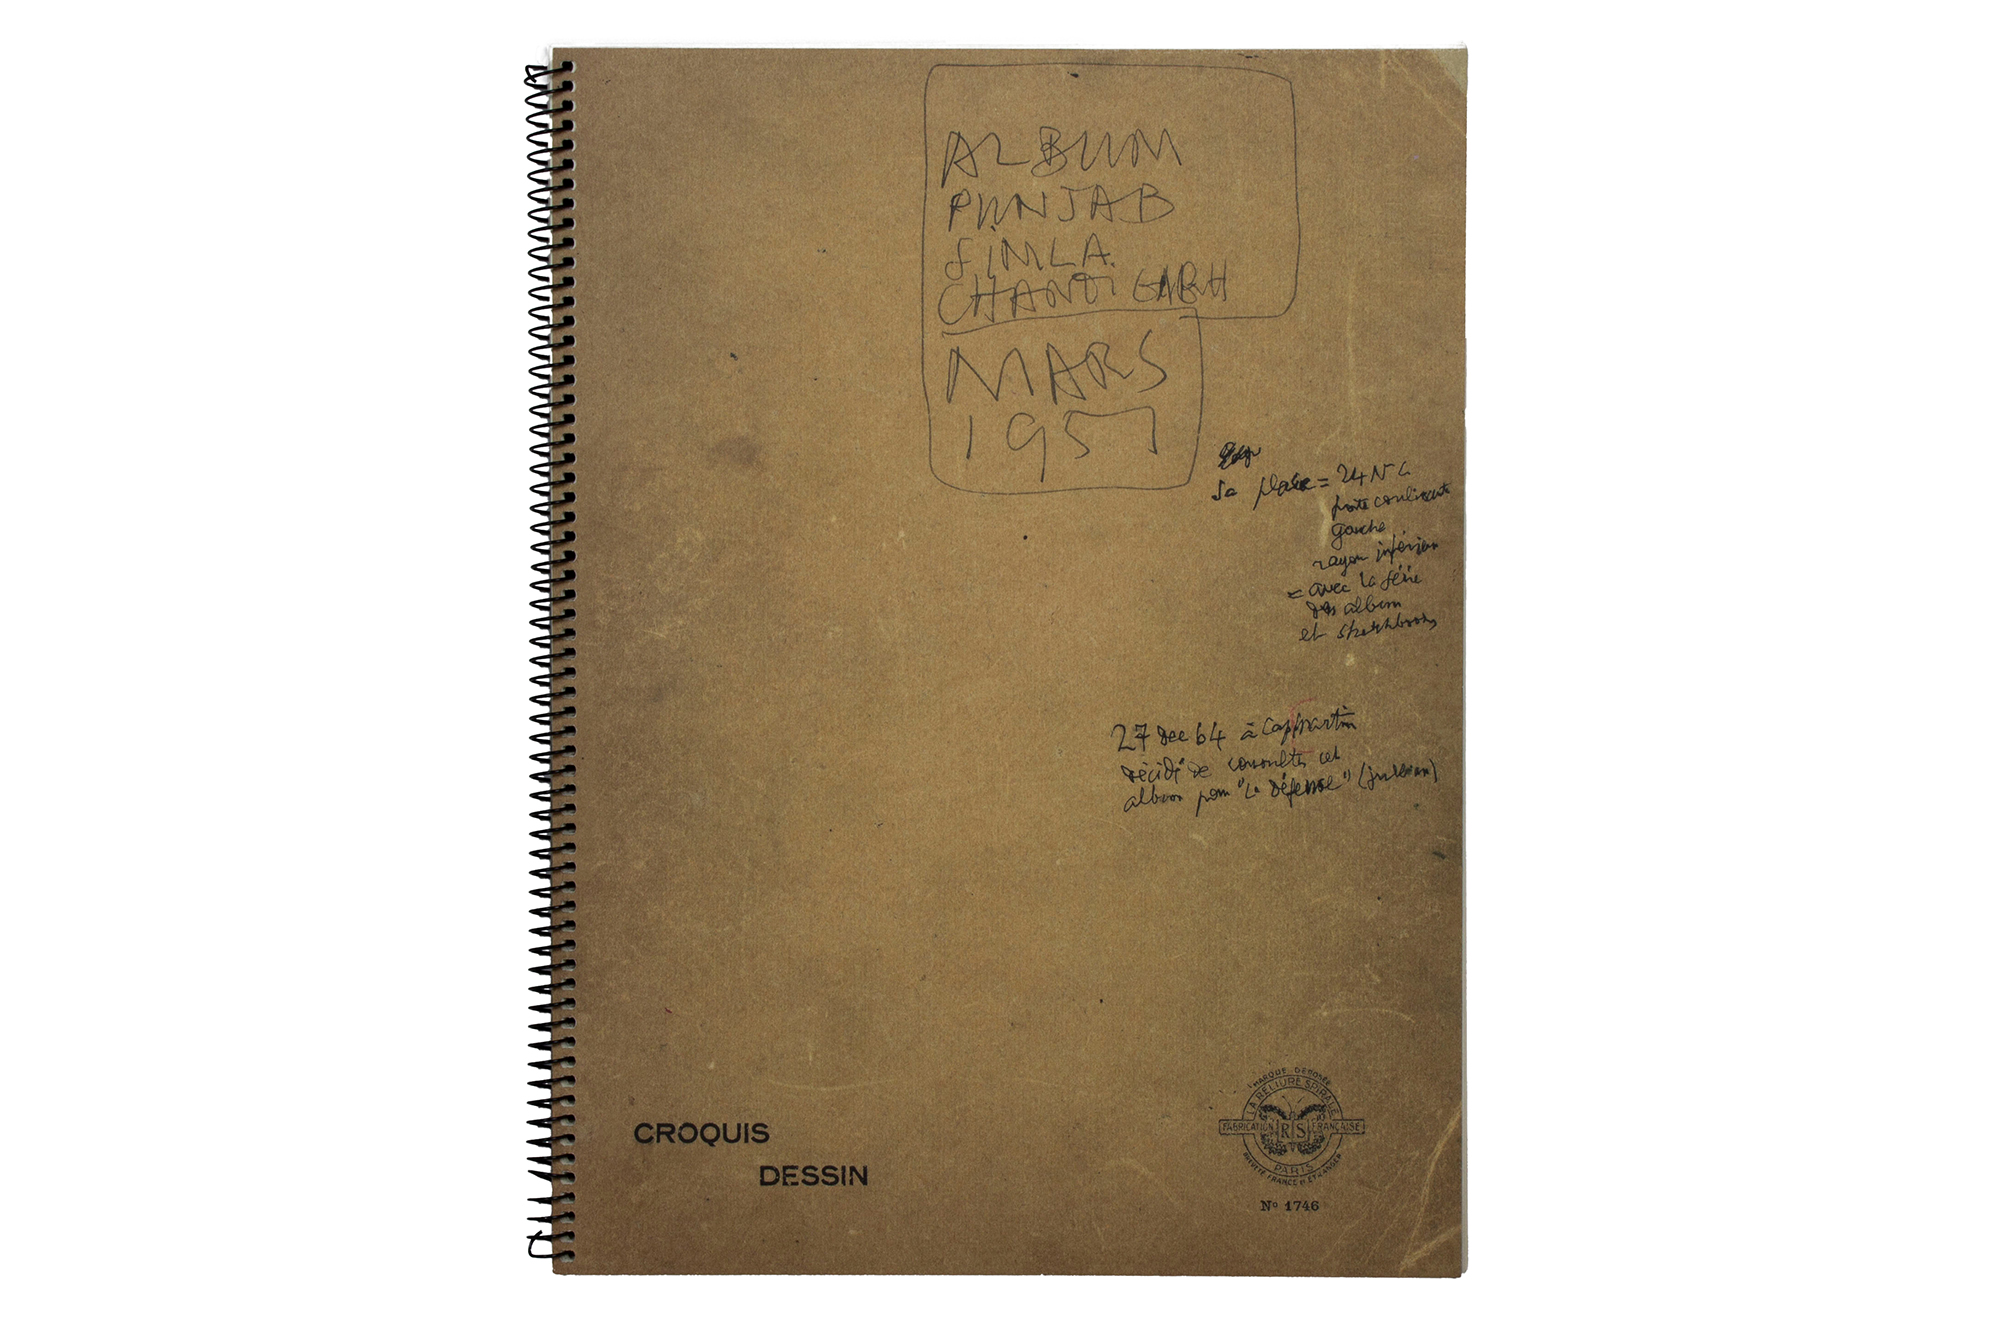 Facsimile edition of Le Corbusier's spiral-bound notebook, known as "Album Punjab"